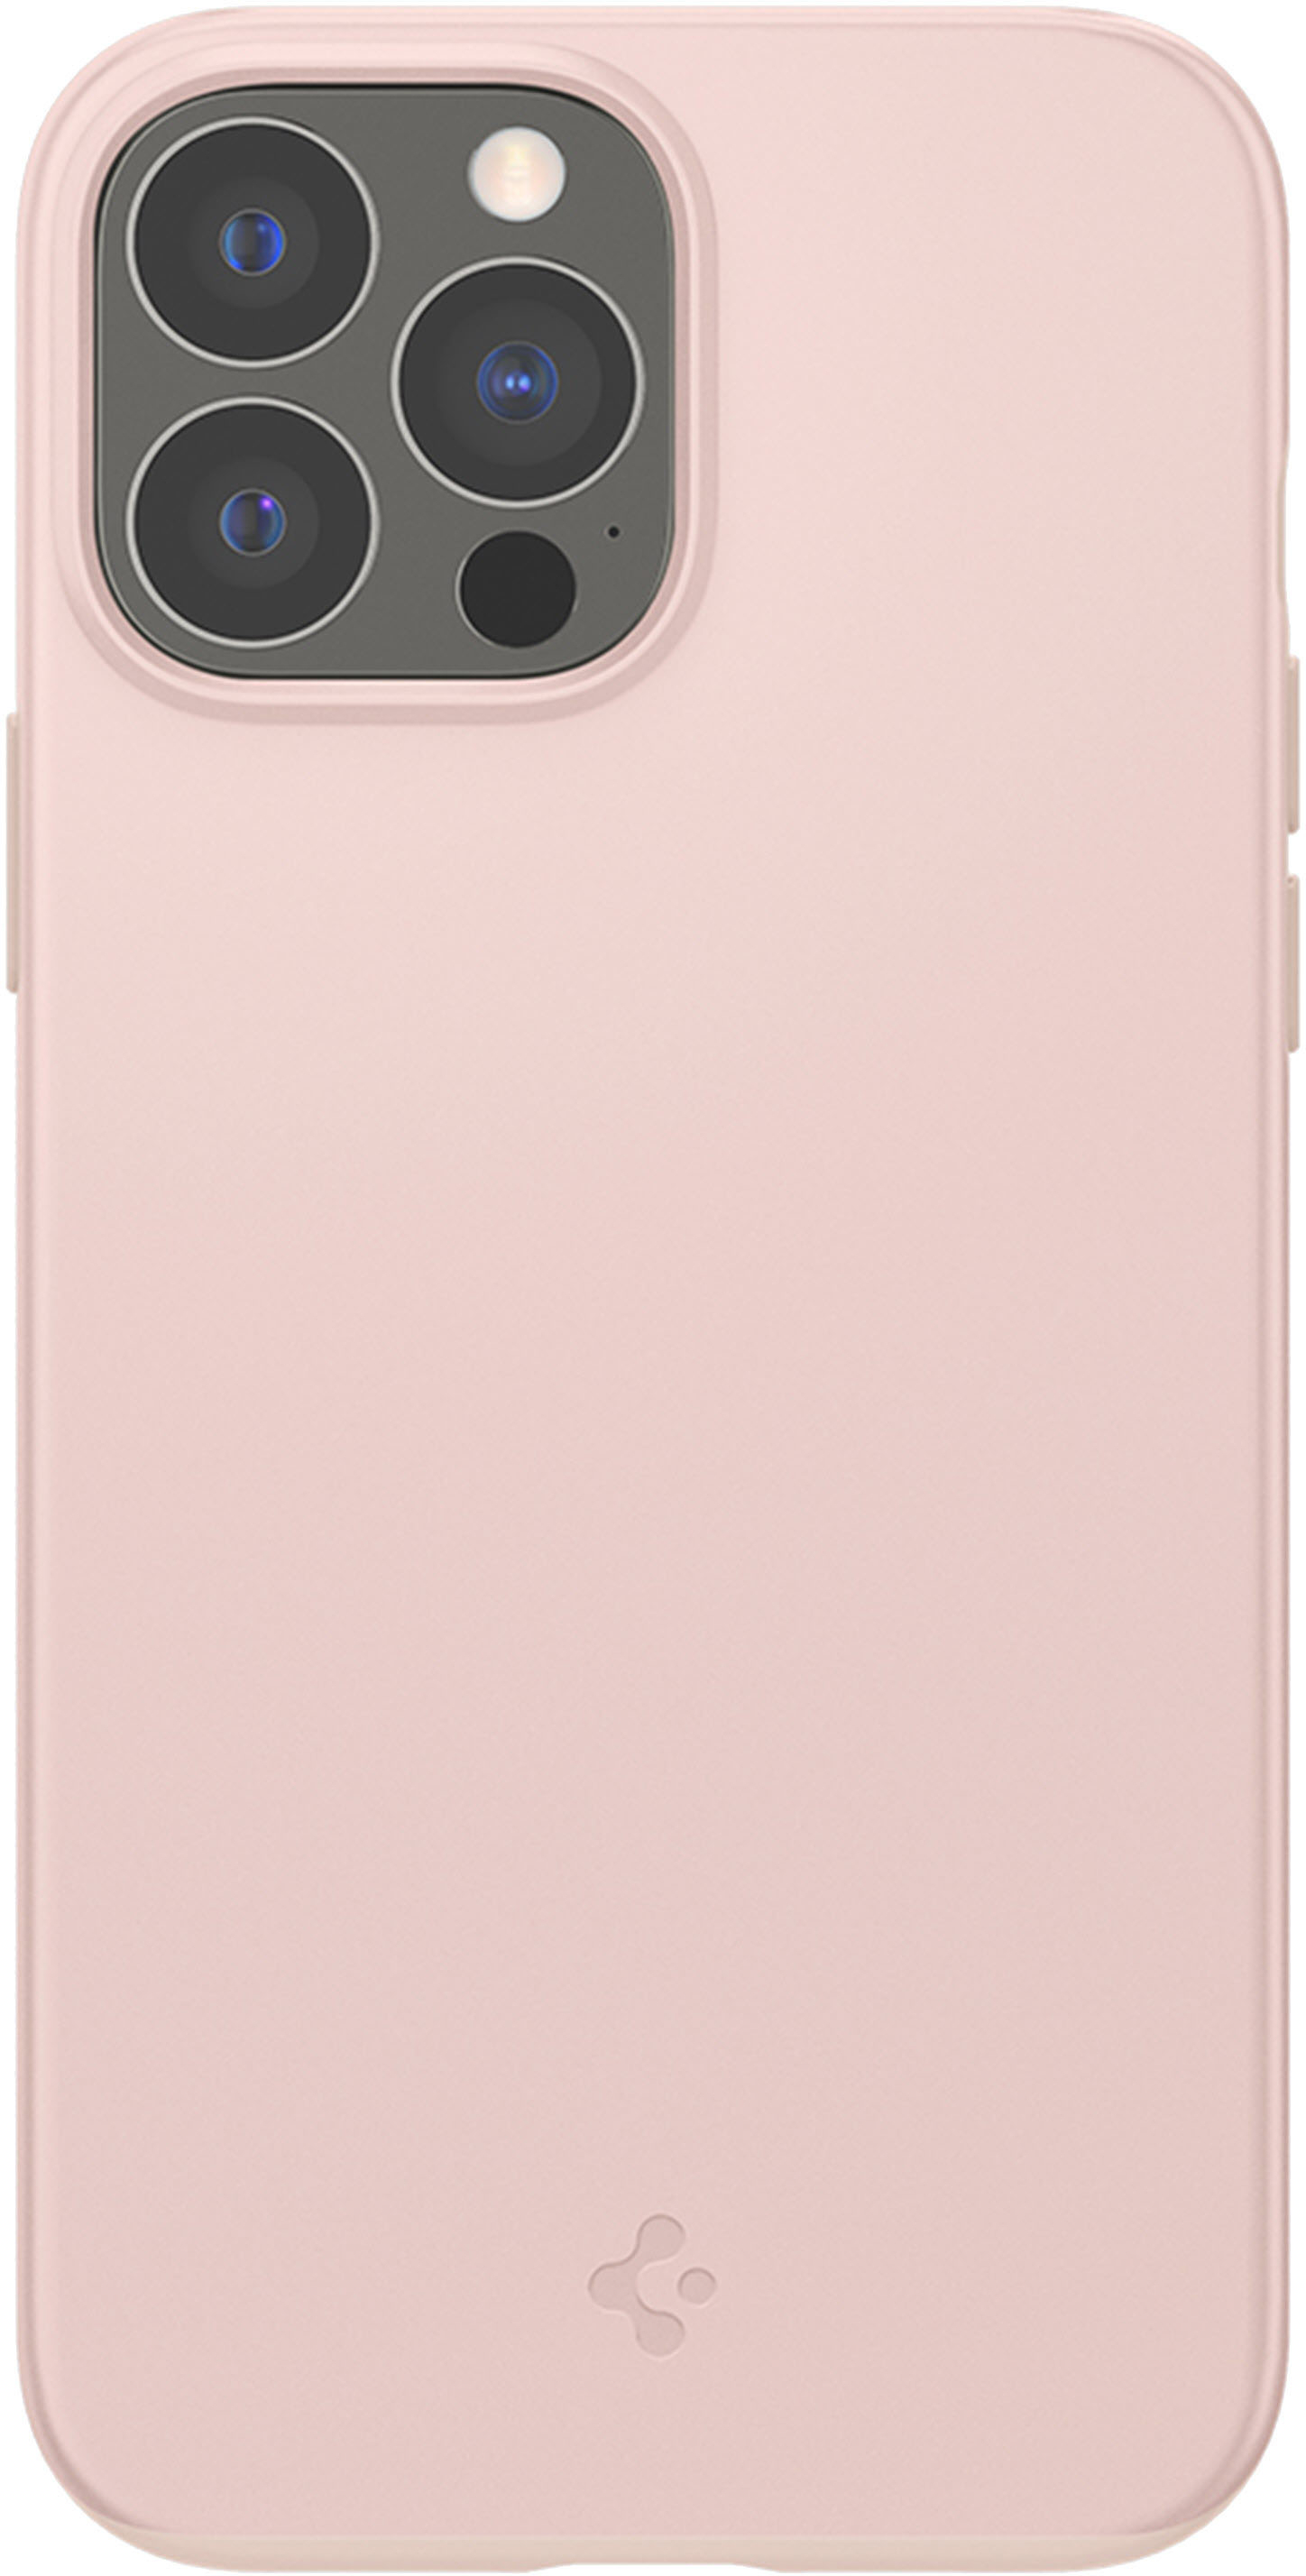 Spigen Thin Fit Hard Shell Case for Apple iPhone 13 Pro Max & iPhone 12 Pro  Max Pink Sand 55893BBR - Best Buy